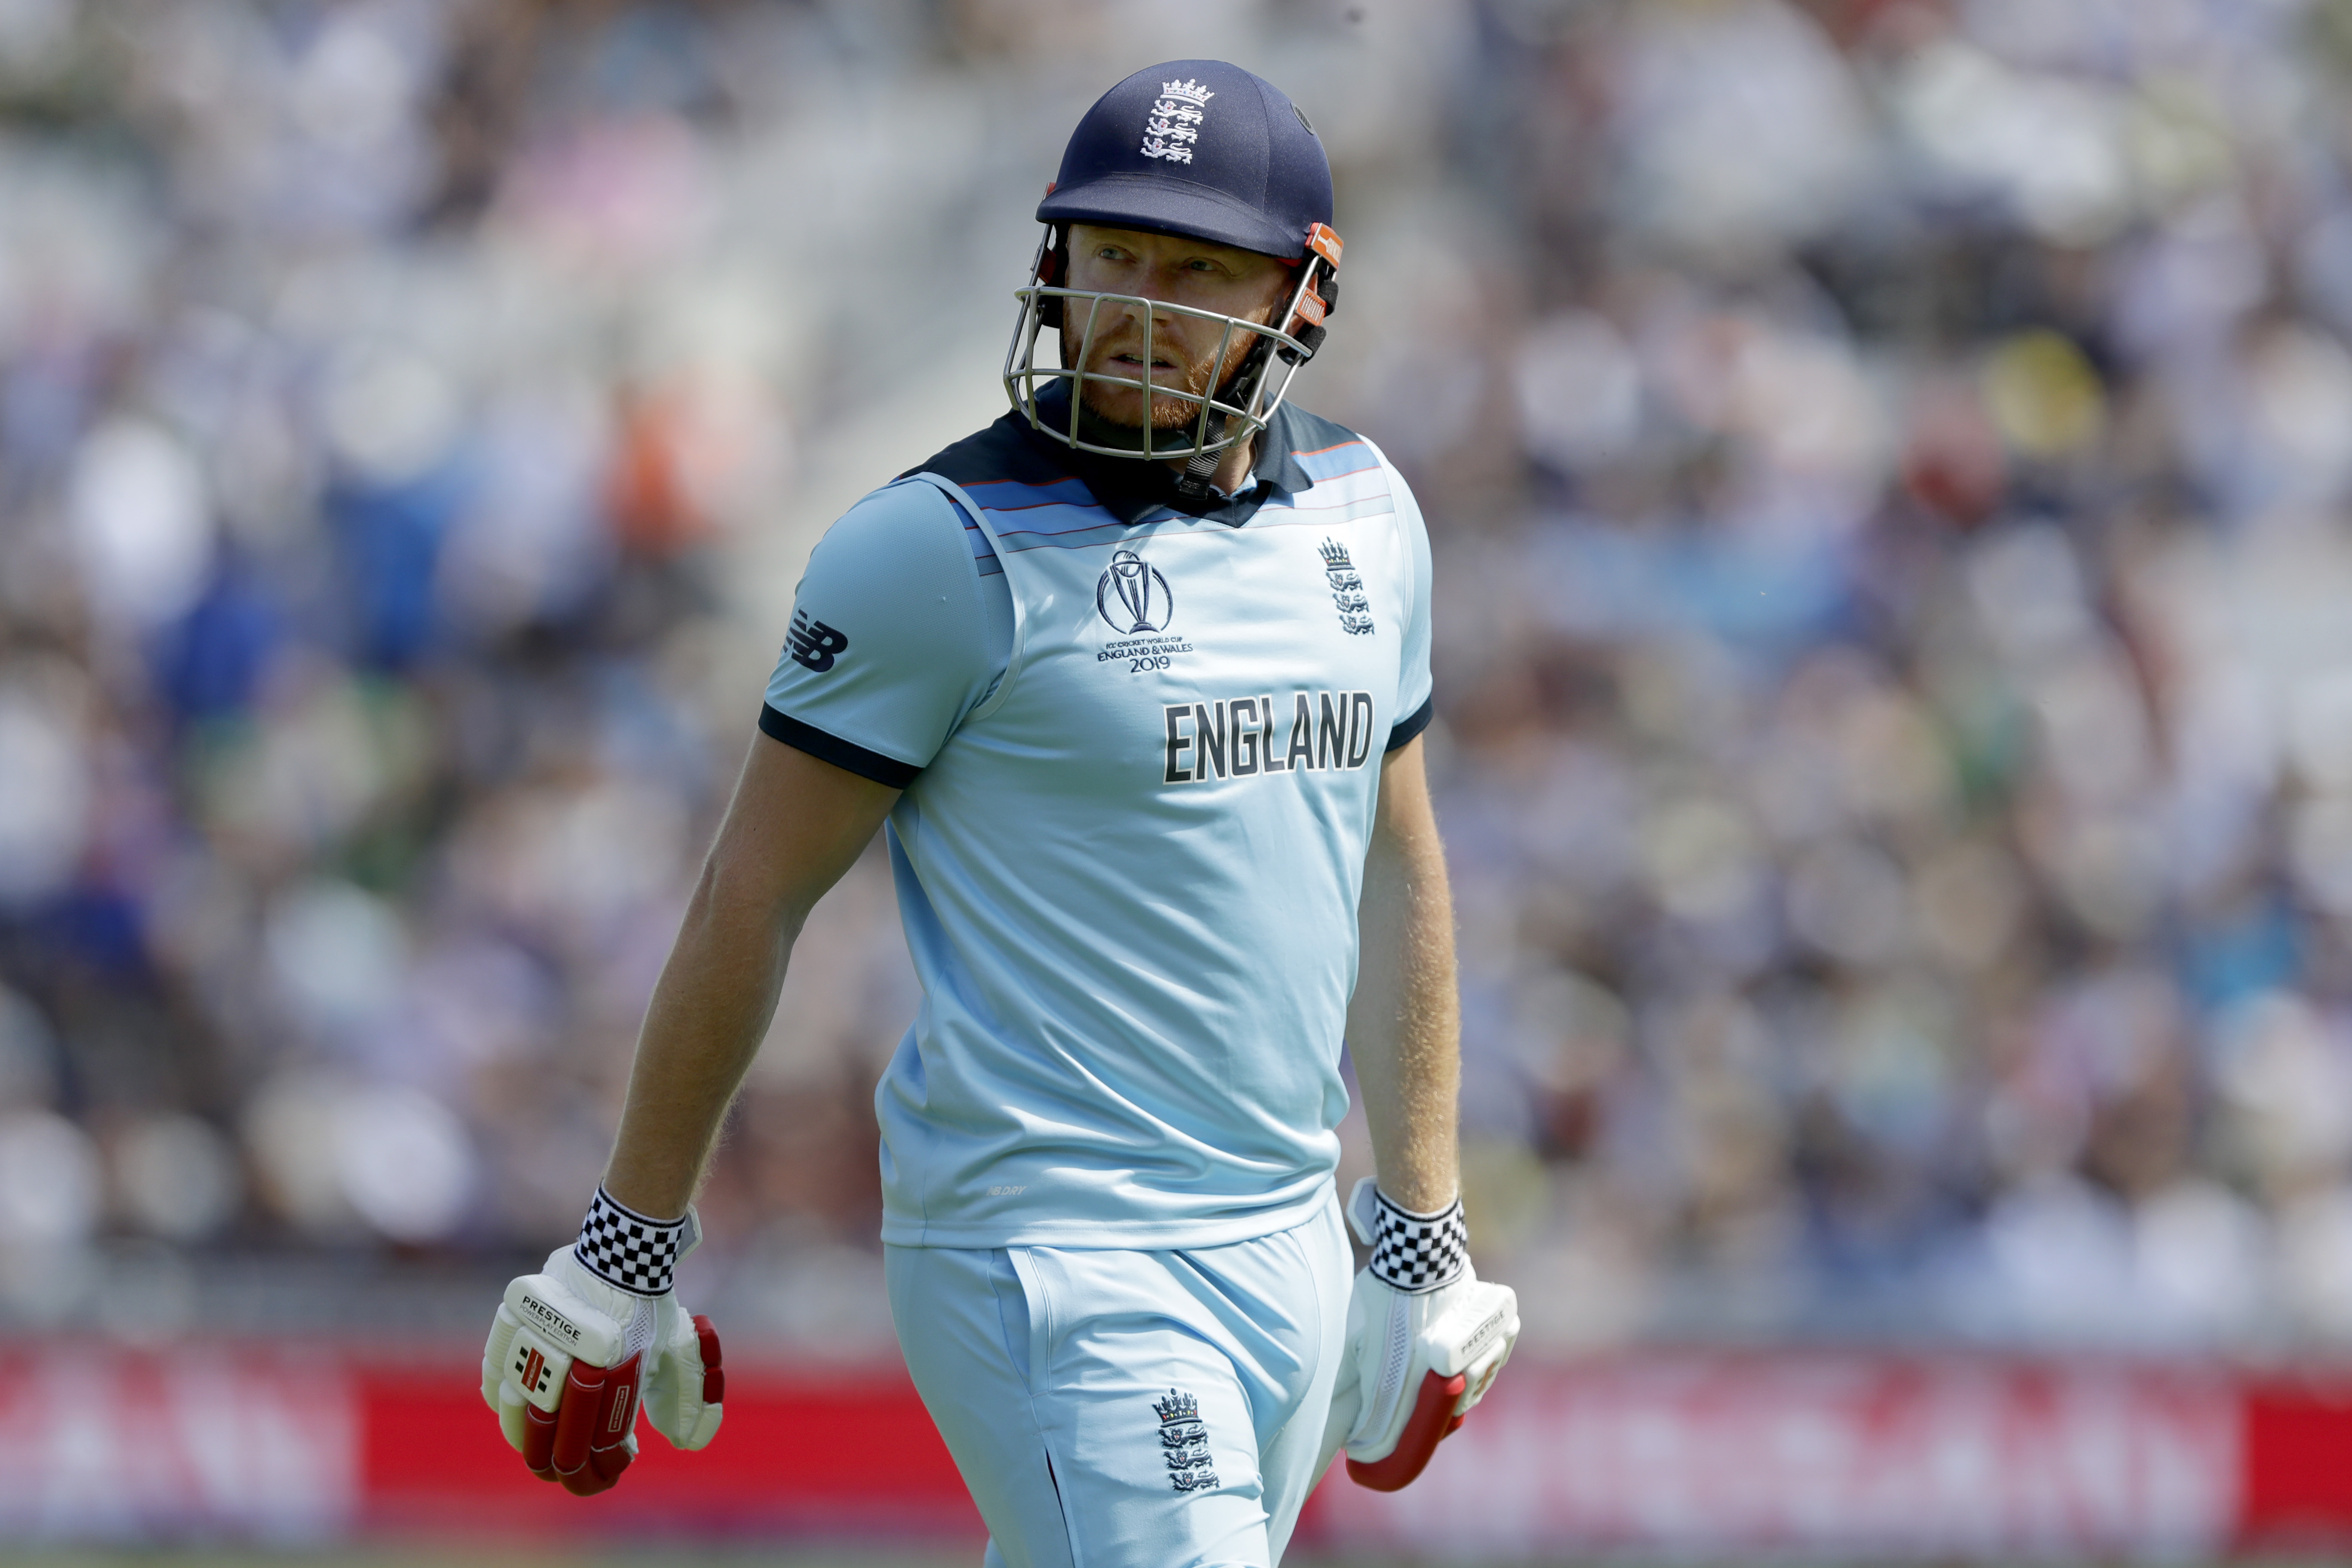 England's Jonny Bairstow leaves the pitch after he is caught by South Africa's Quinton de Kock off the bowling of South Africa's Imran Tahir during the first World Cup cricket match between England and South Africa at The Oval in London on Thursday.